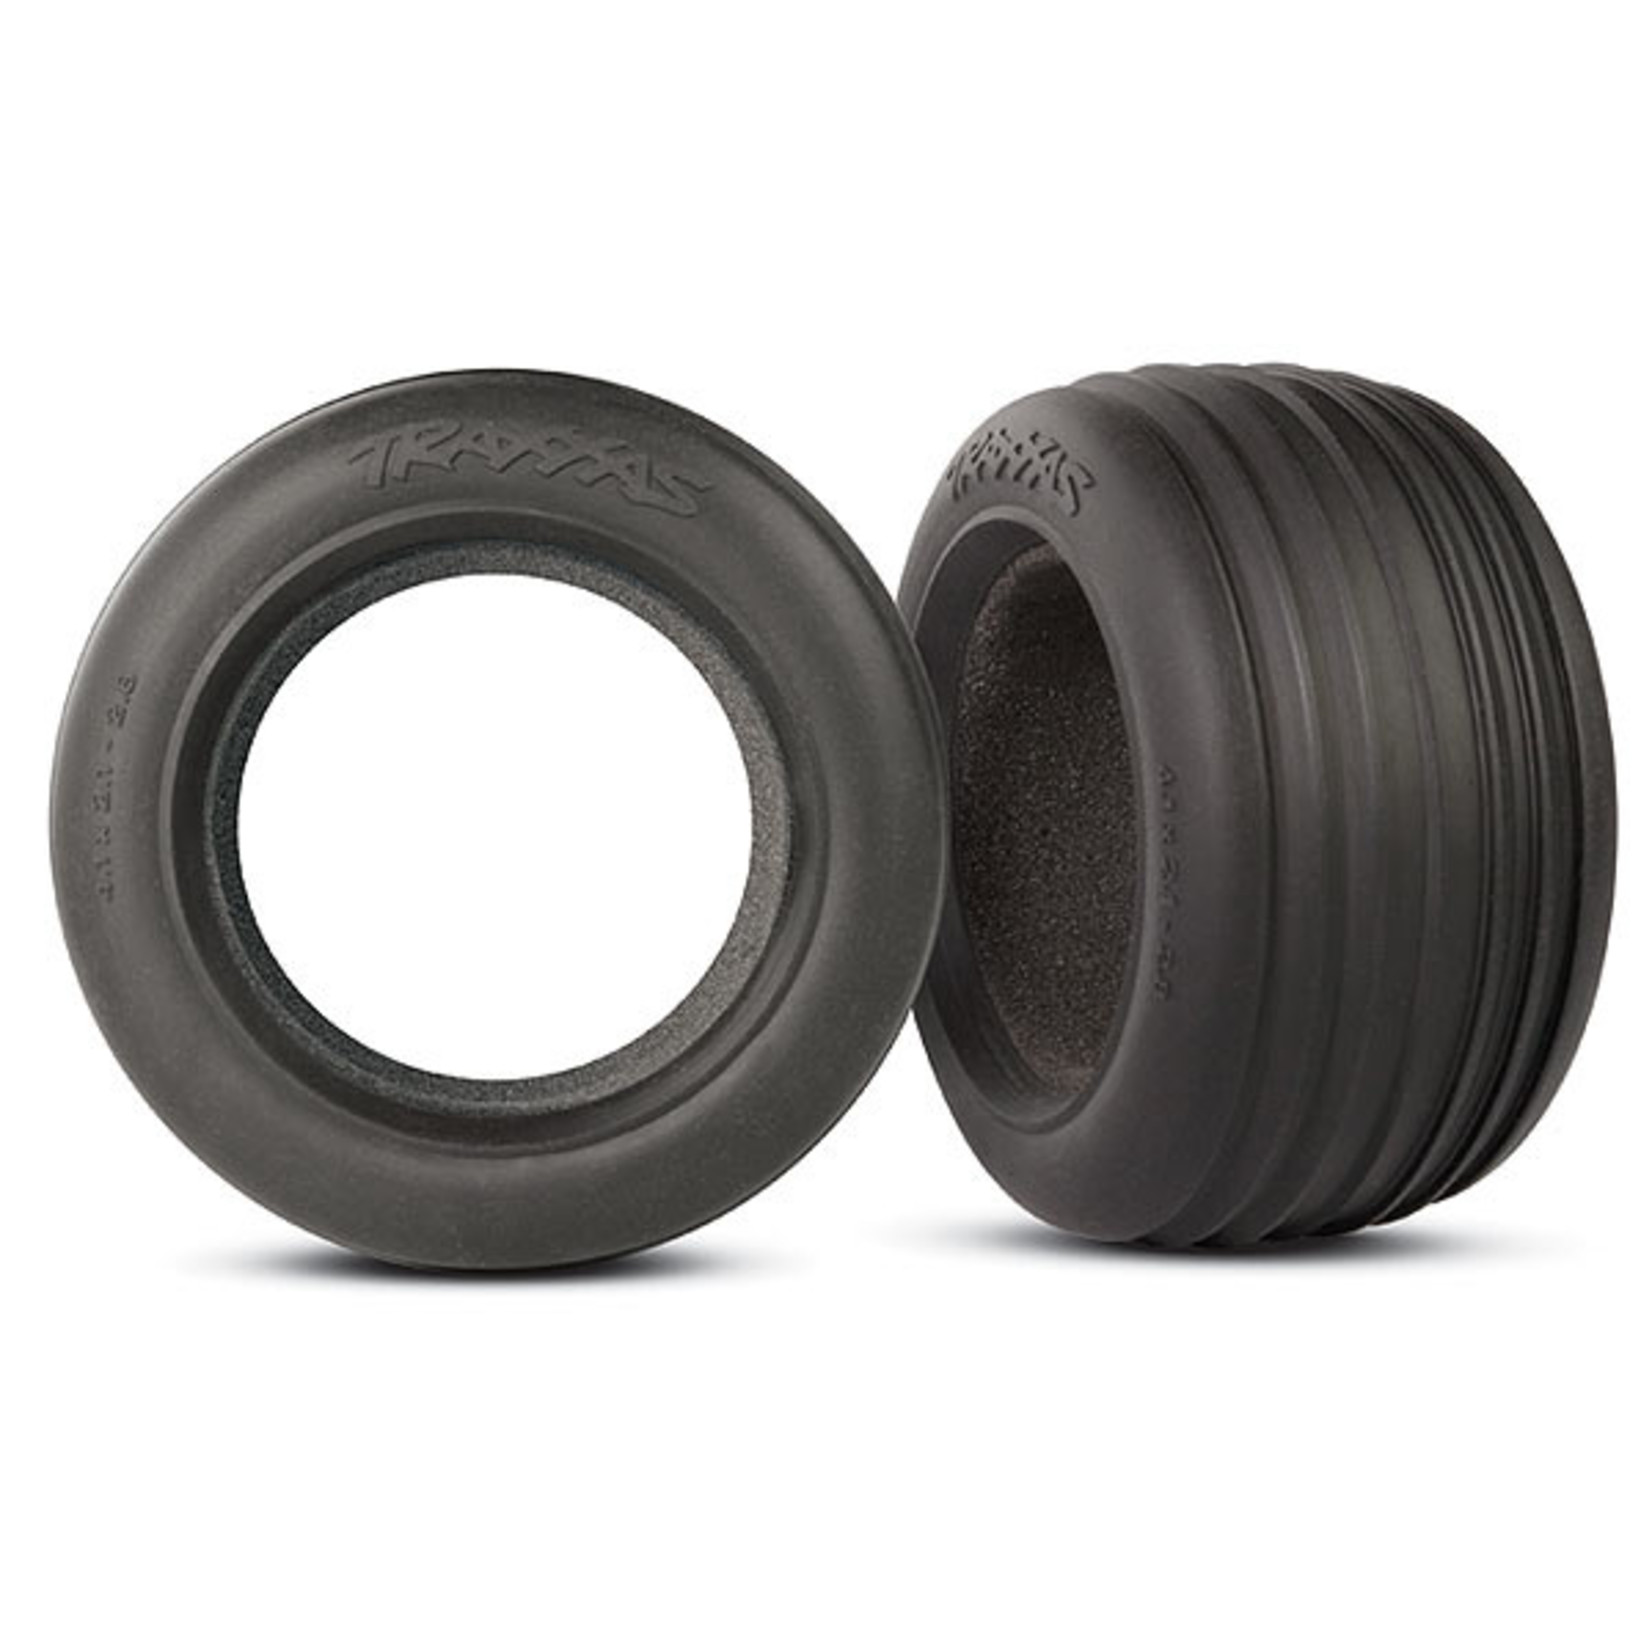 Traxxas 5563 - Tires, Ribbed 2.8' (2)/ foam inserts (2)